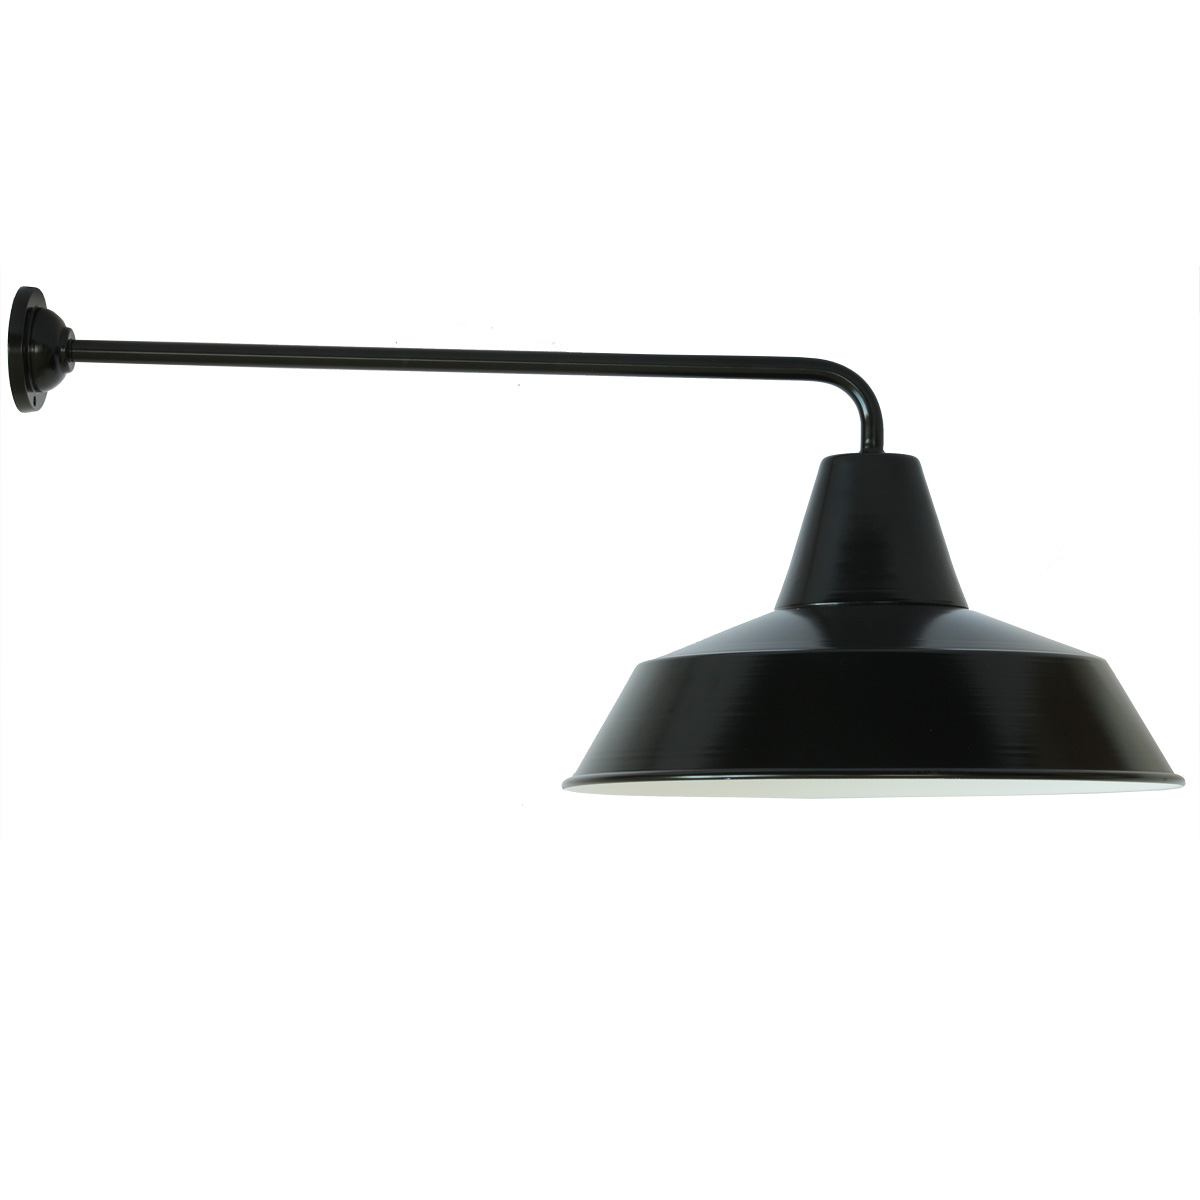 Outdoor wall light, industrial style with long bracket W290L (Ø 42 cm)